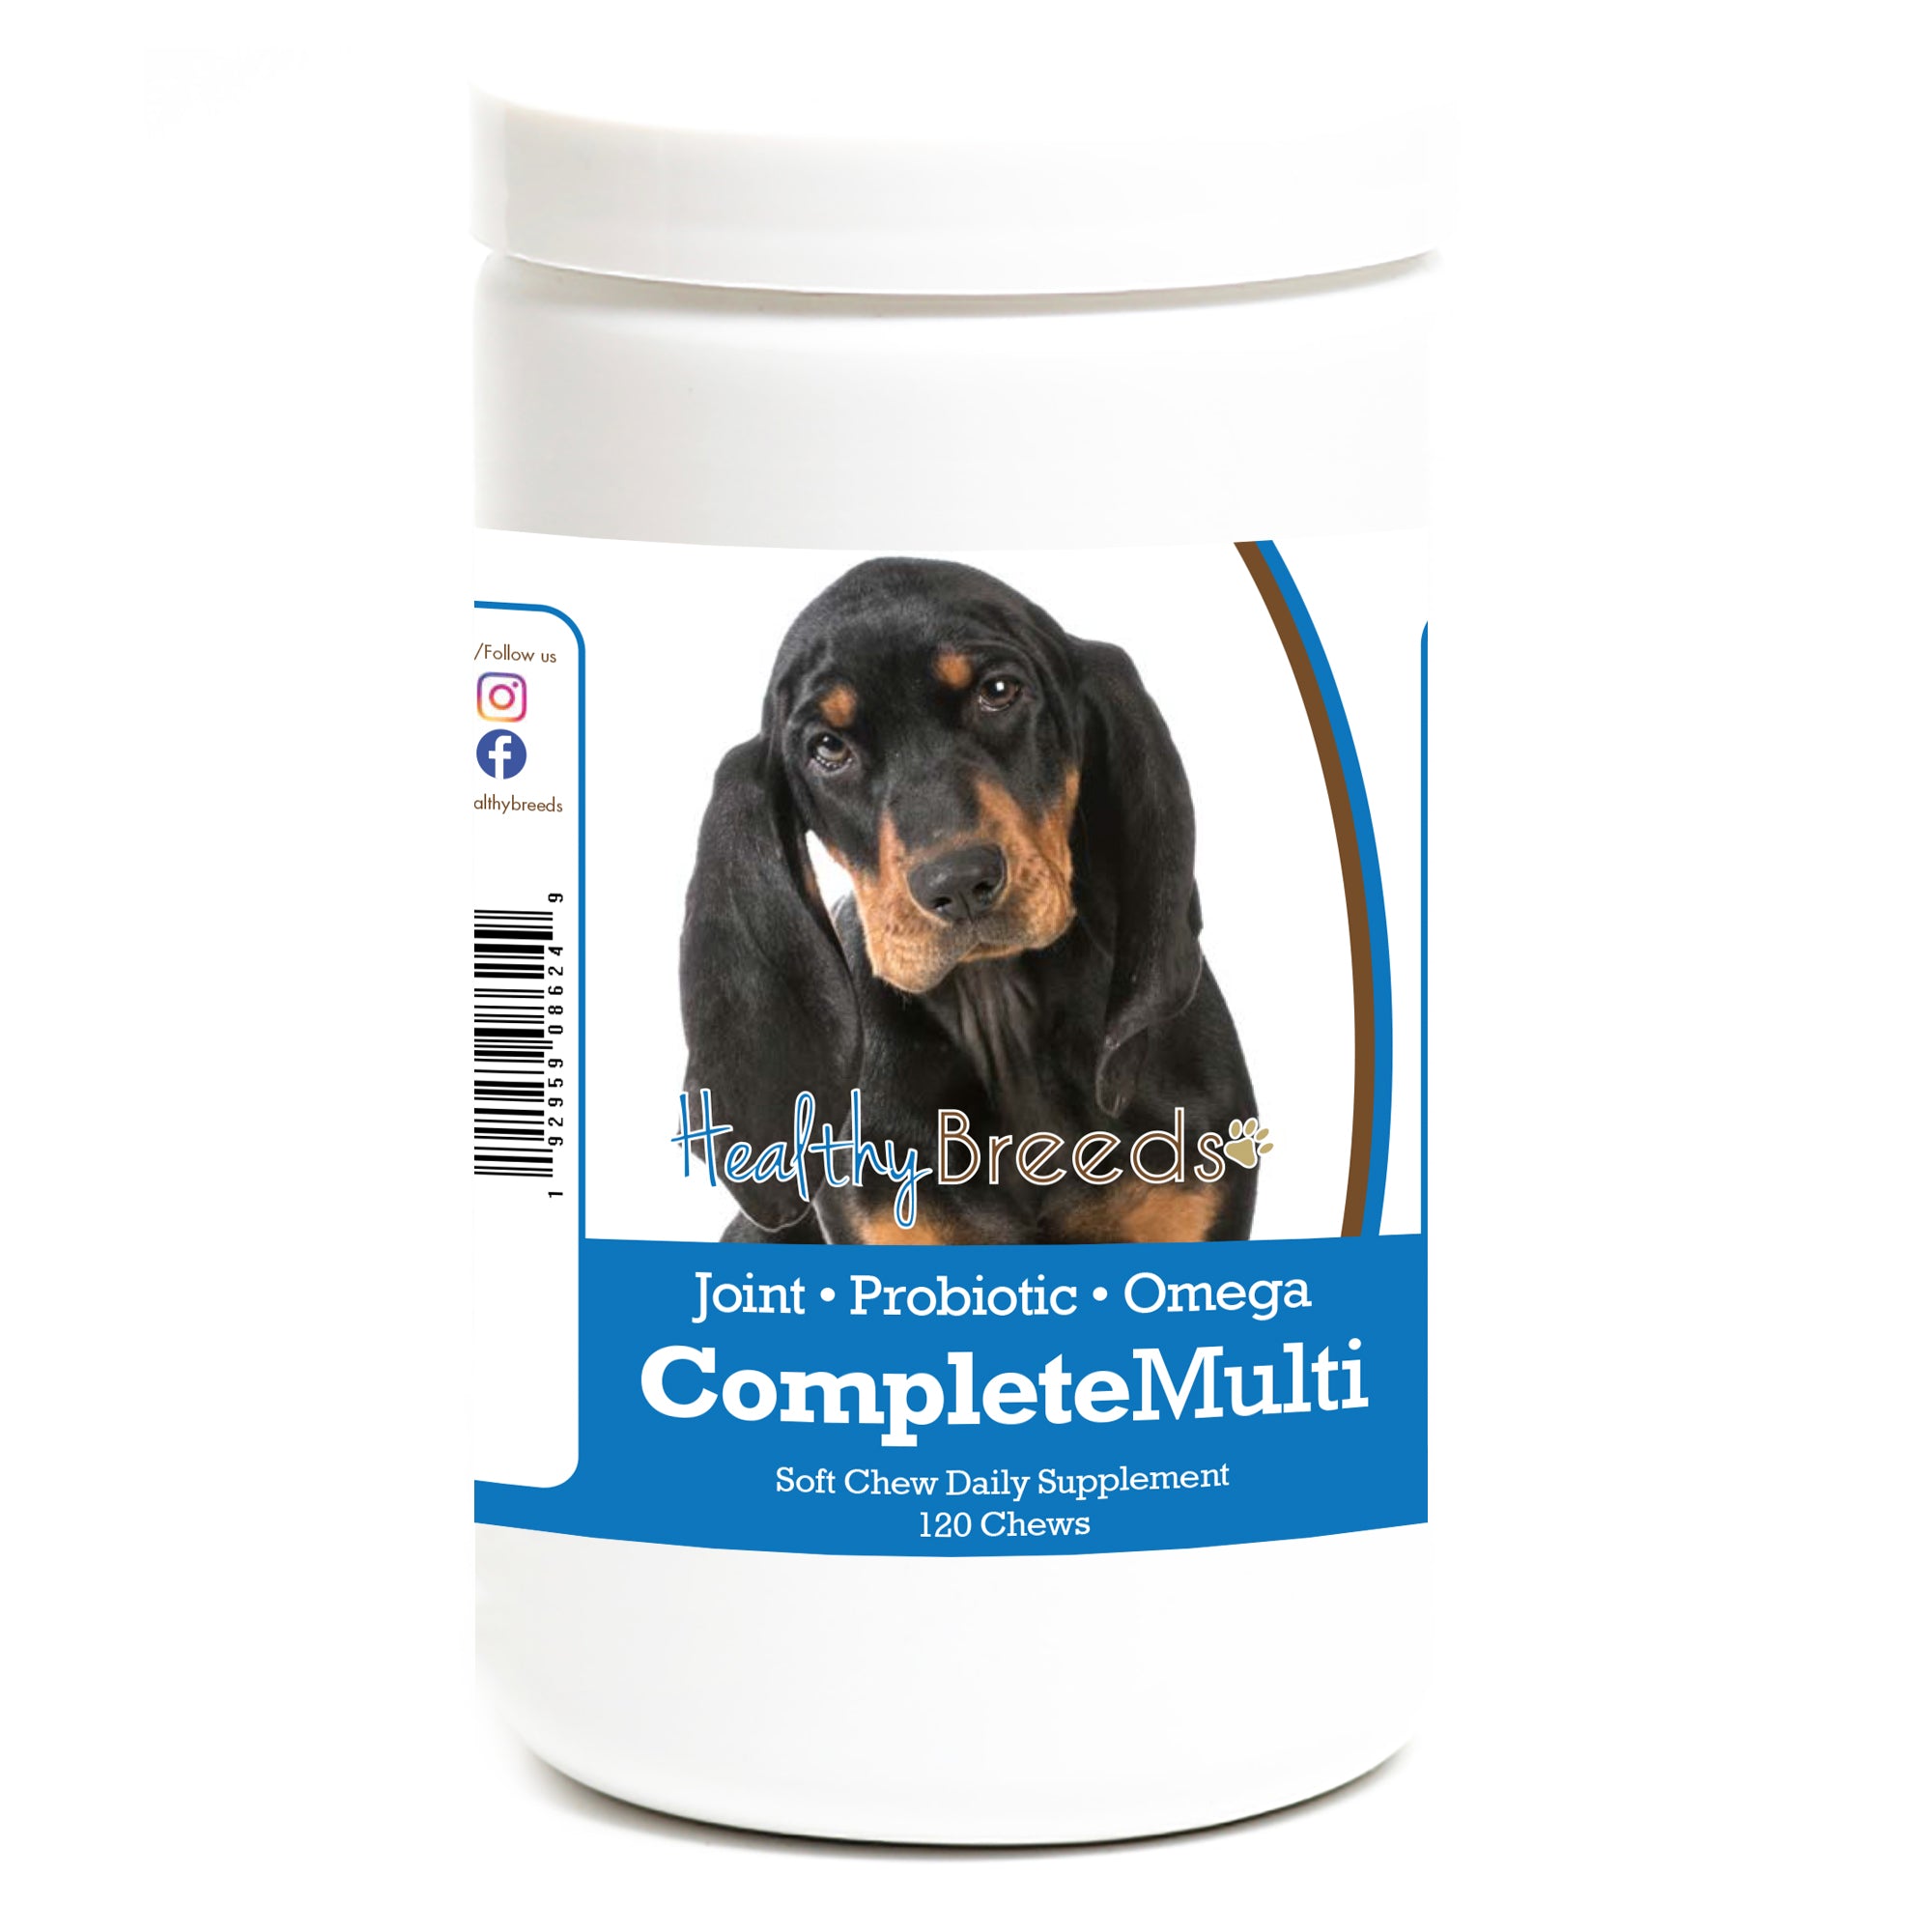 Black and Tan Coonhound All In One Multivitamin Soft Chew 120 Count